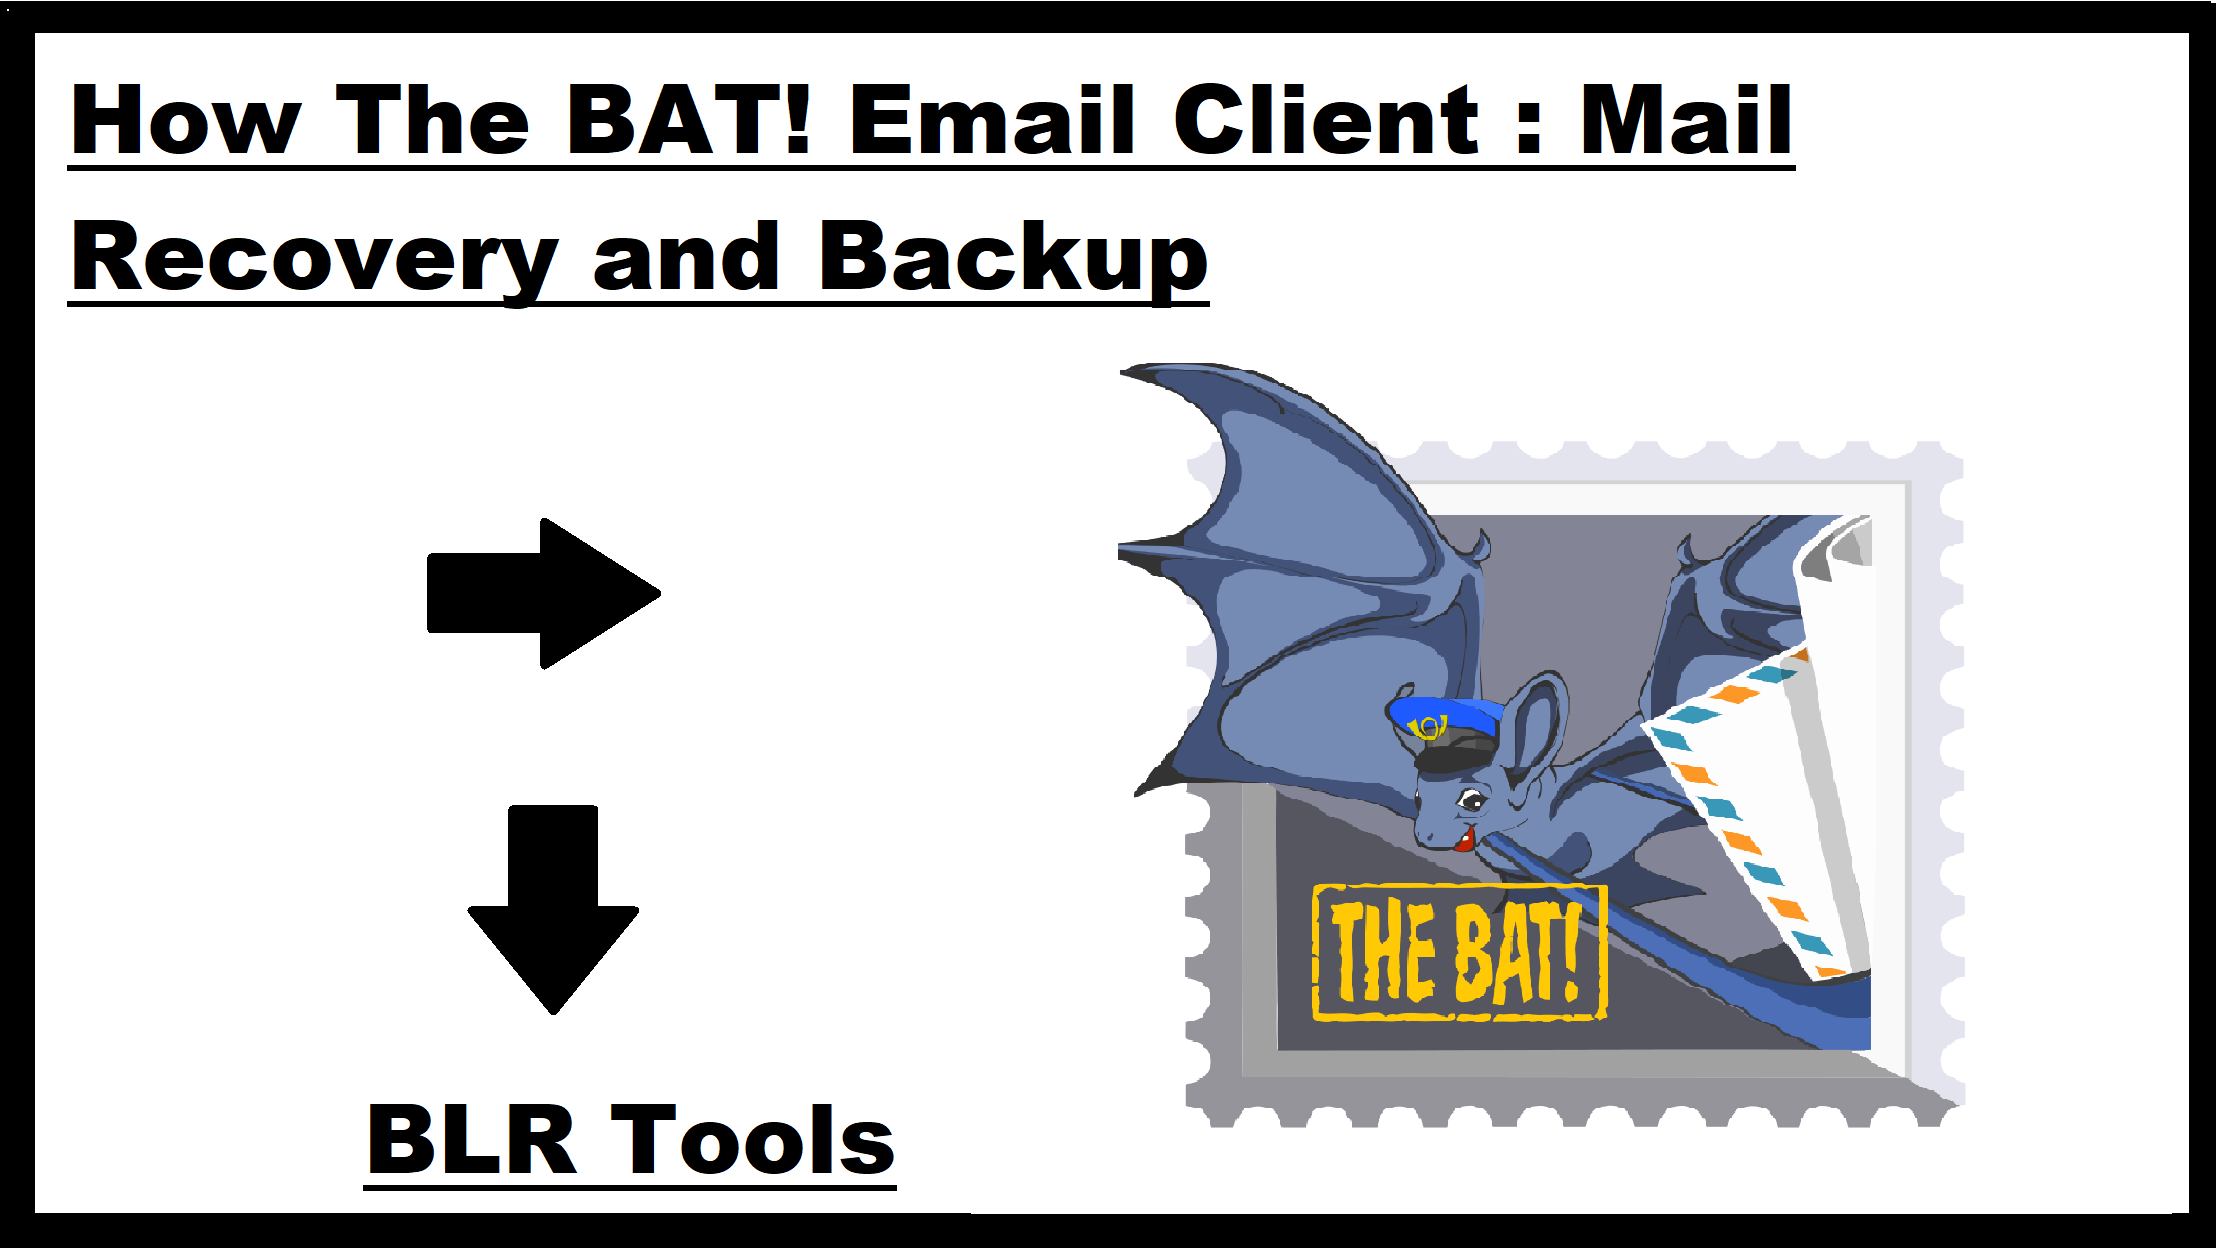 mail-recovery-and-backup